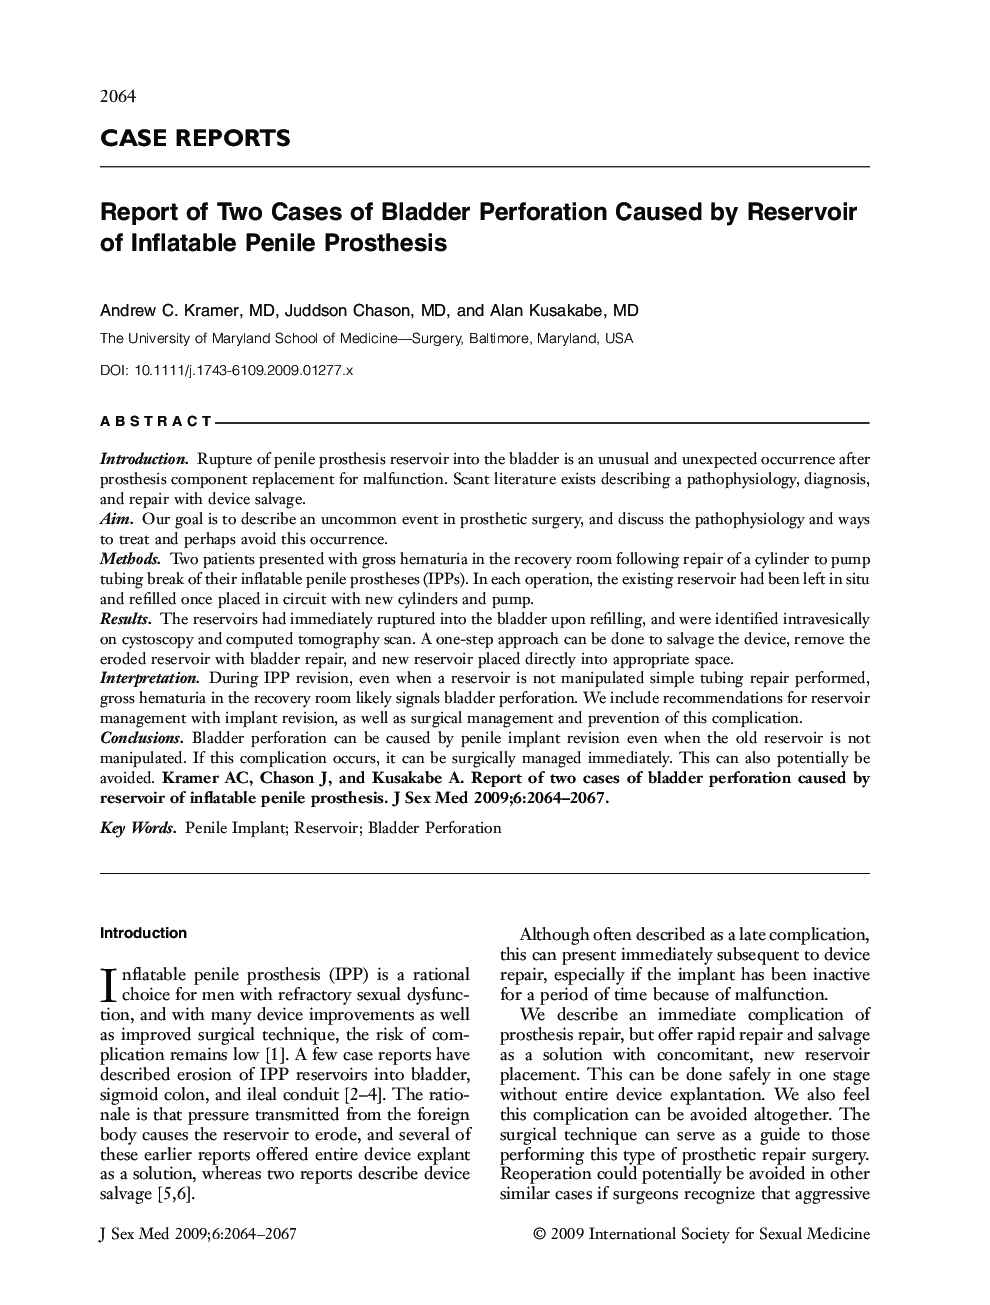 CASE REPORTS: Report of Two Cases of Bladder Perforation Caused by Reservoir of Inflatable Penile Prosthesis